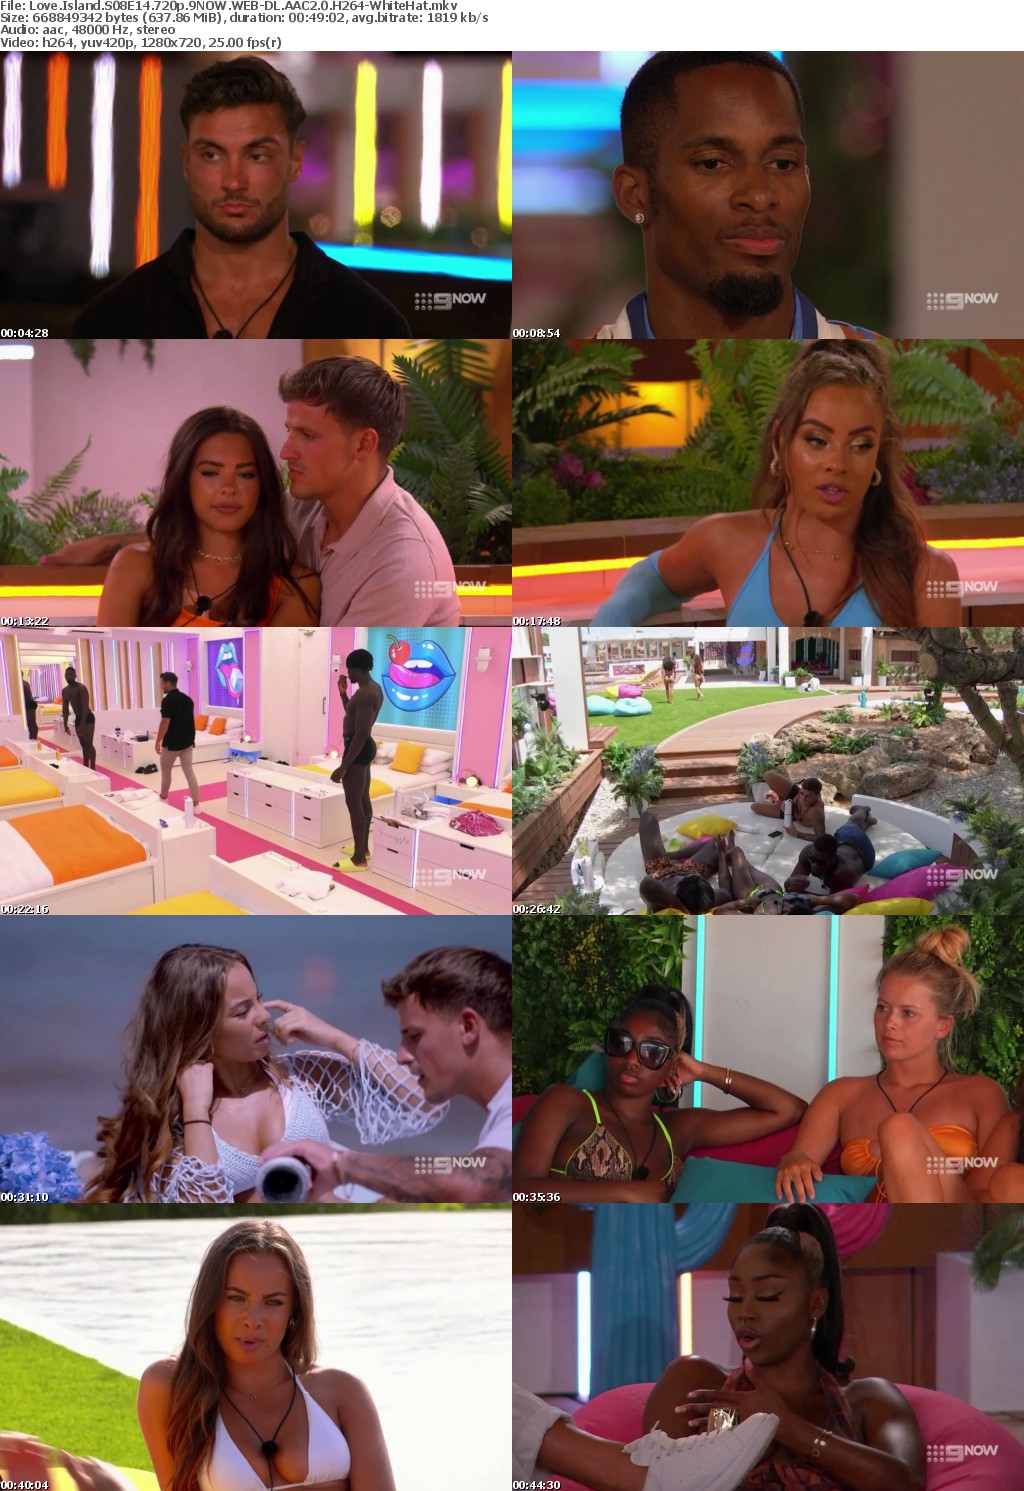 Love Island S08E14 720p 9NOW WEB-DL AAC2 0 H264-WhiteHat